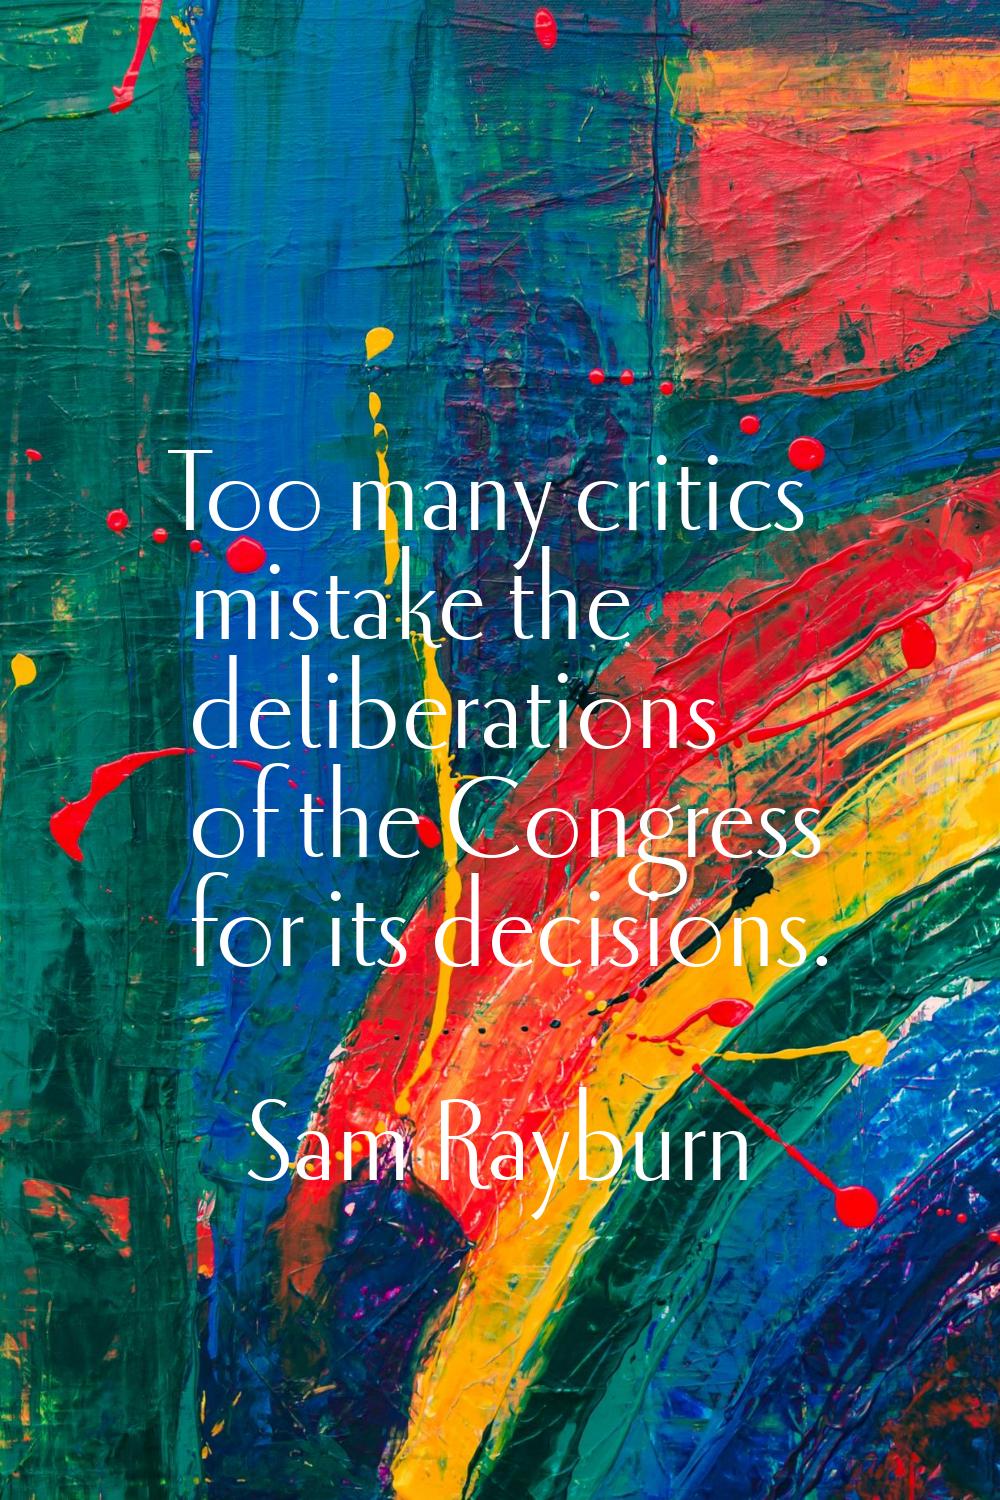 Too many critics mistake the deliberations of the Congress for its decisions.